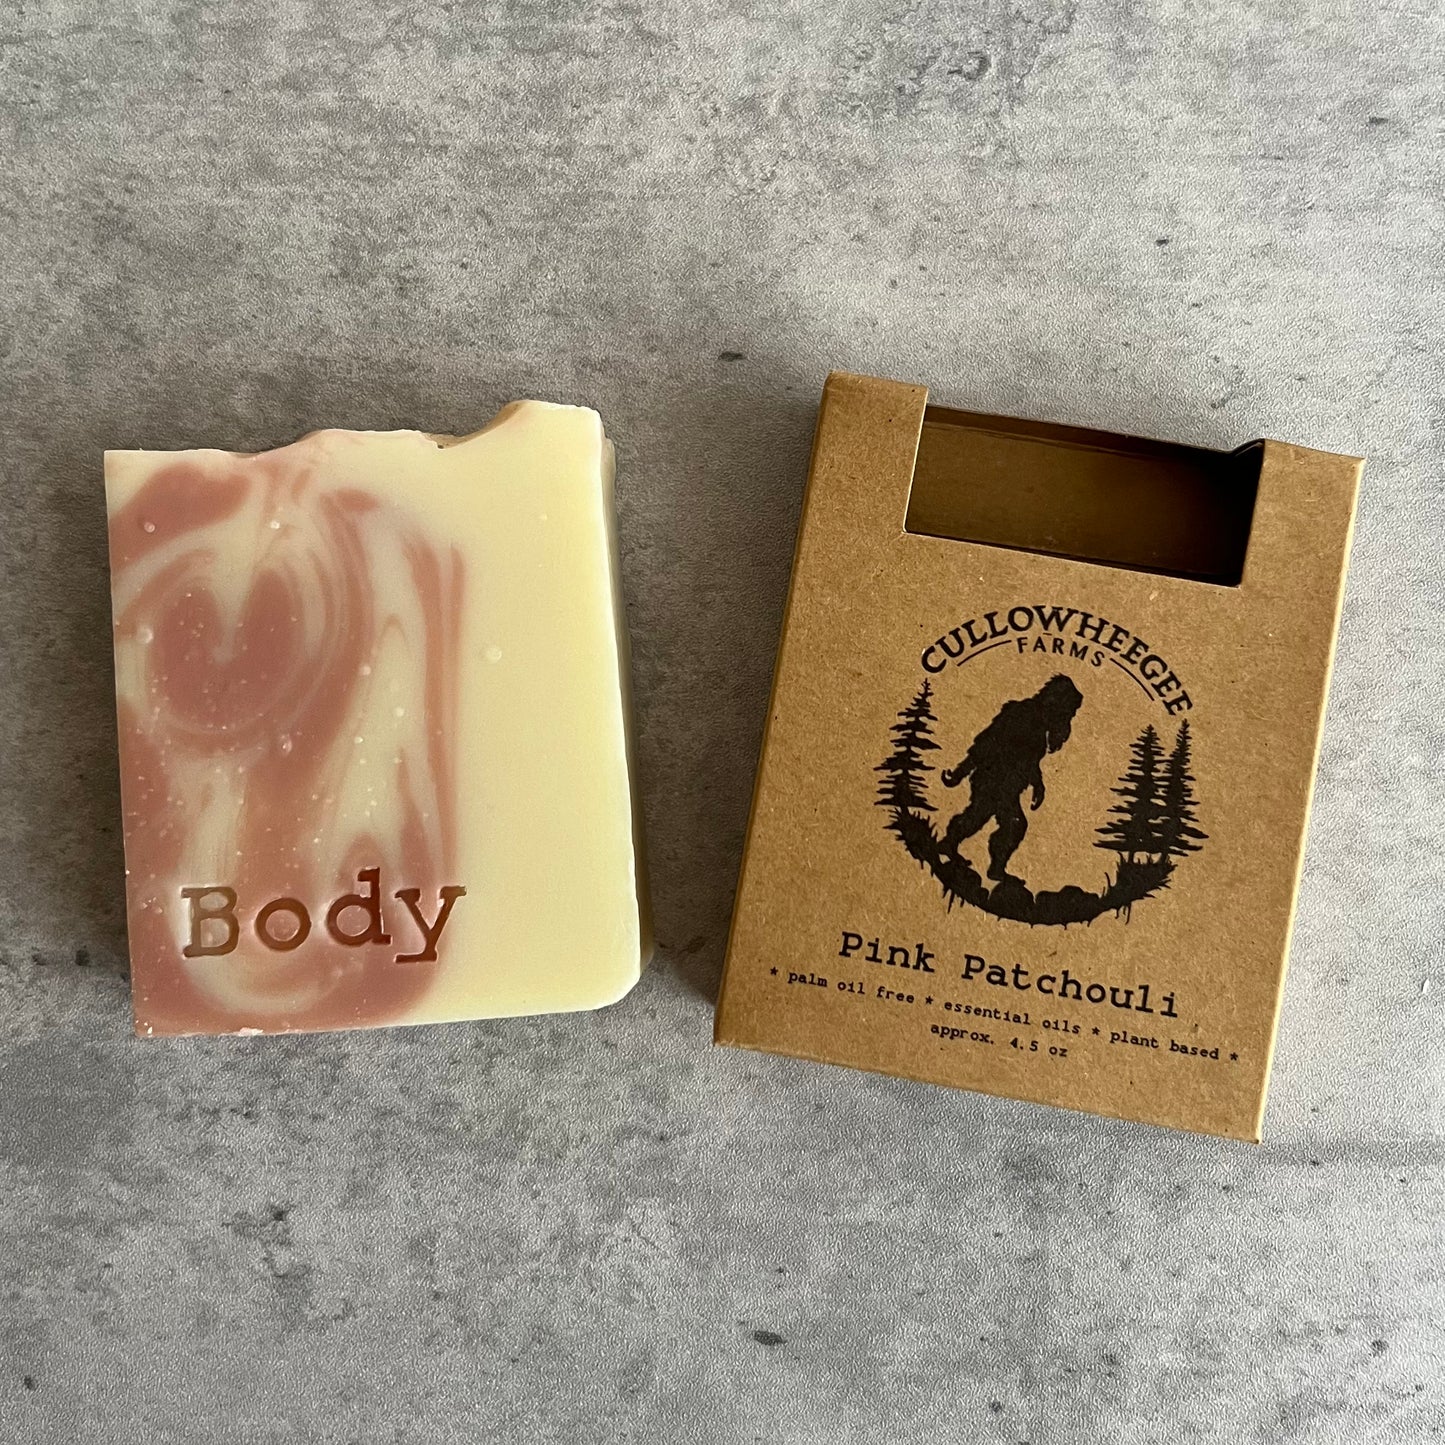 Cullowheegee Farms Pink Patchouli Soap